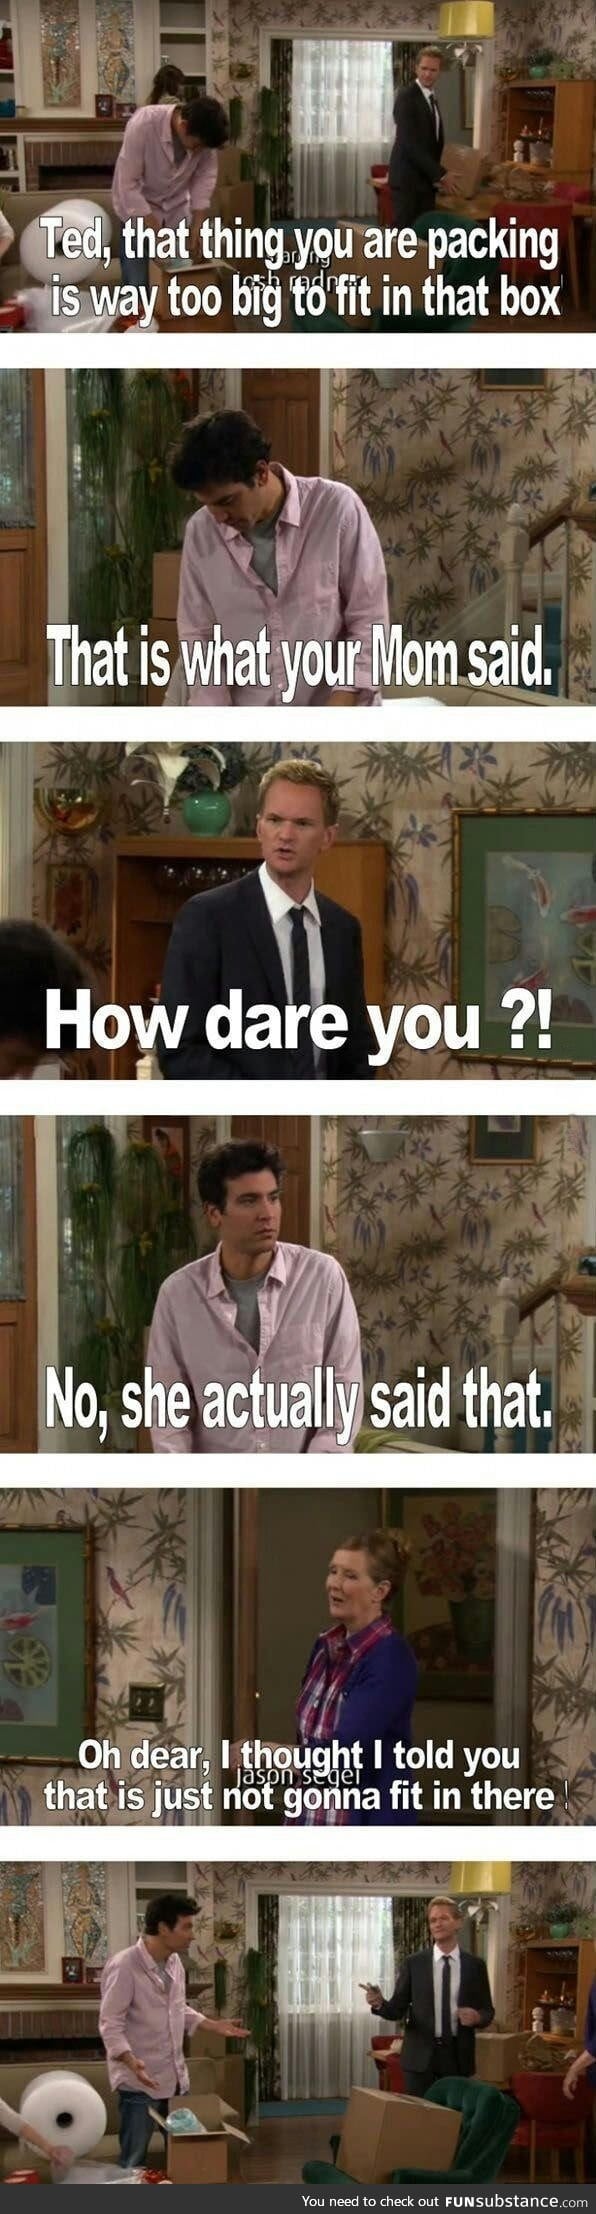 HIMYM at its finest